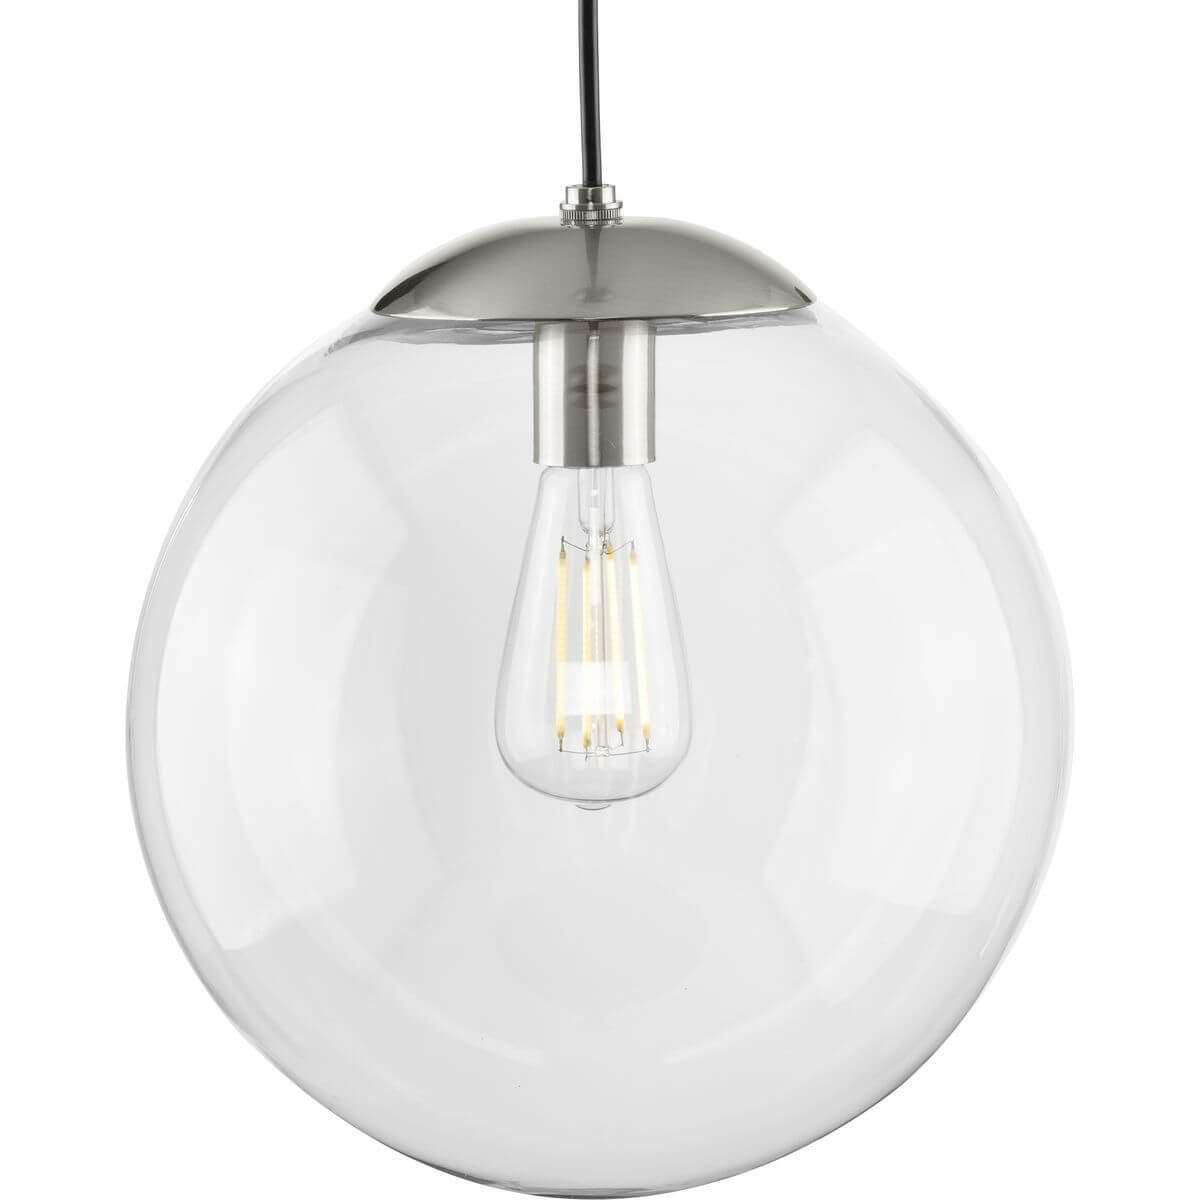 Progress Lighting Atwell 1 Light 12 inch Pendant in Brushed Nickel with Clear Glass P500311-009